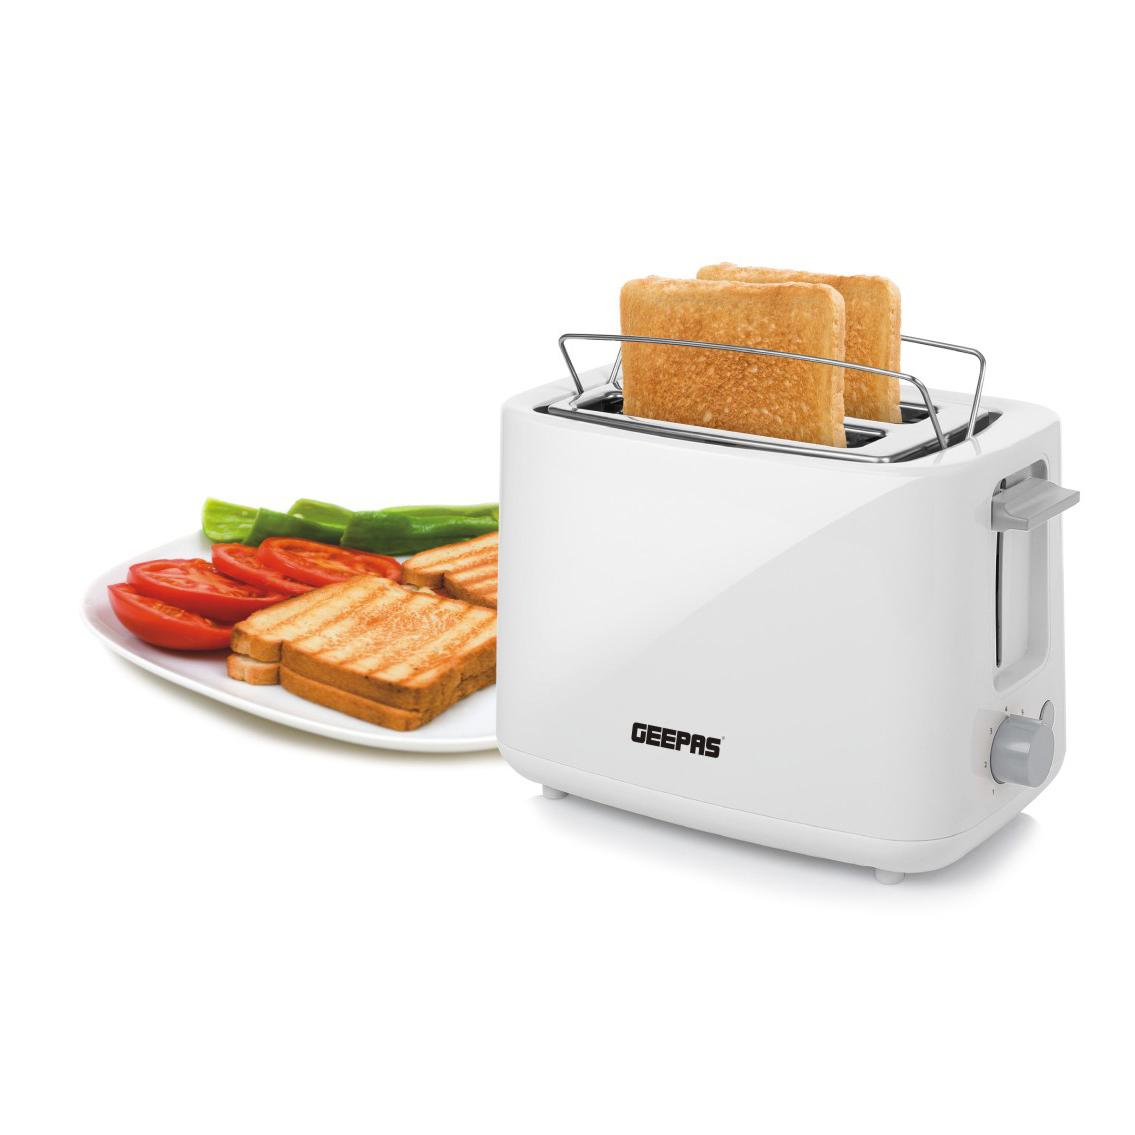 Geepas GBT36505UK 870W 2 Slice Bread Toaster - Toaster with 7 Level Browning Control, Removable Crumb Tray & One-Touch Cancel Button - Slide Out Crumb Tray, Wide Slots & Bun Warmer - 2 Year Warranty